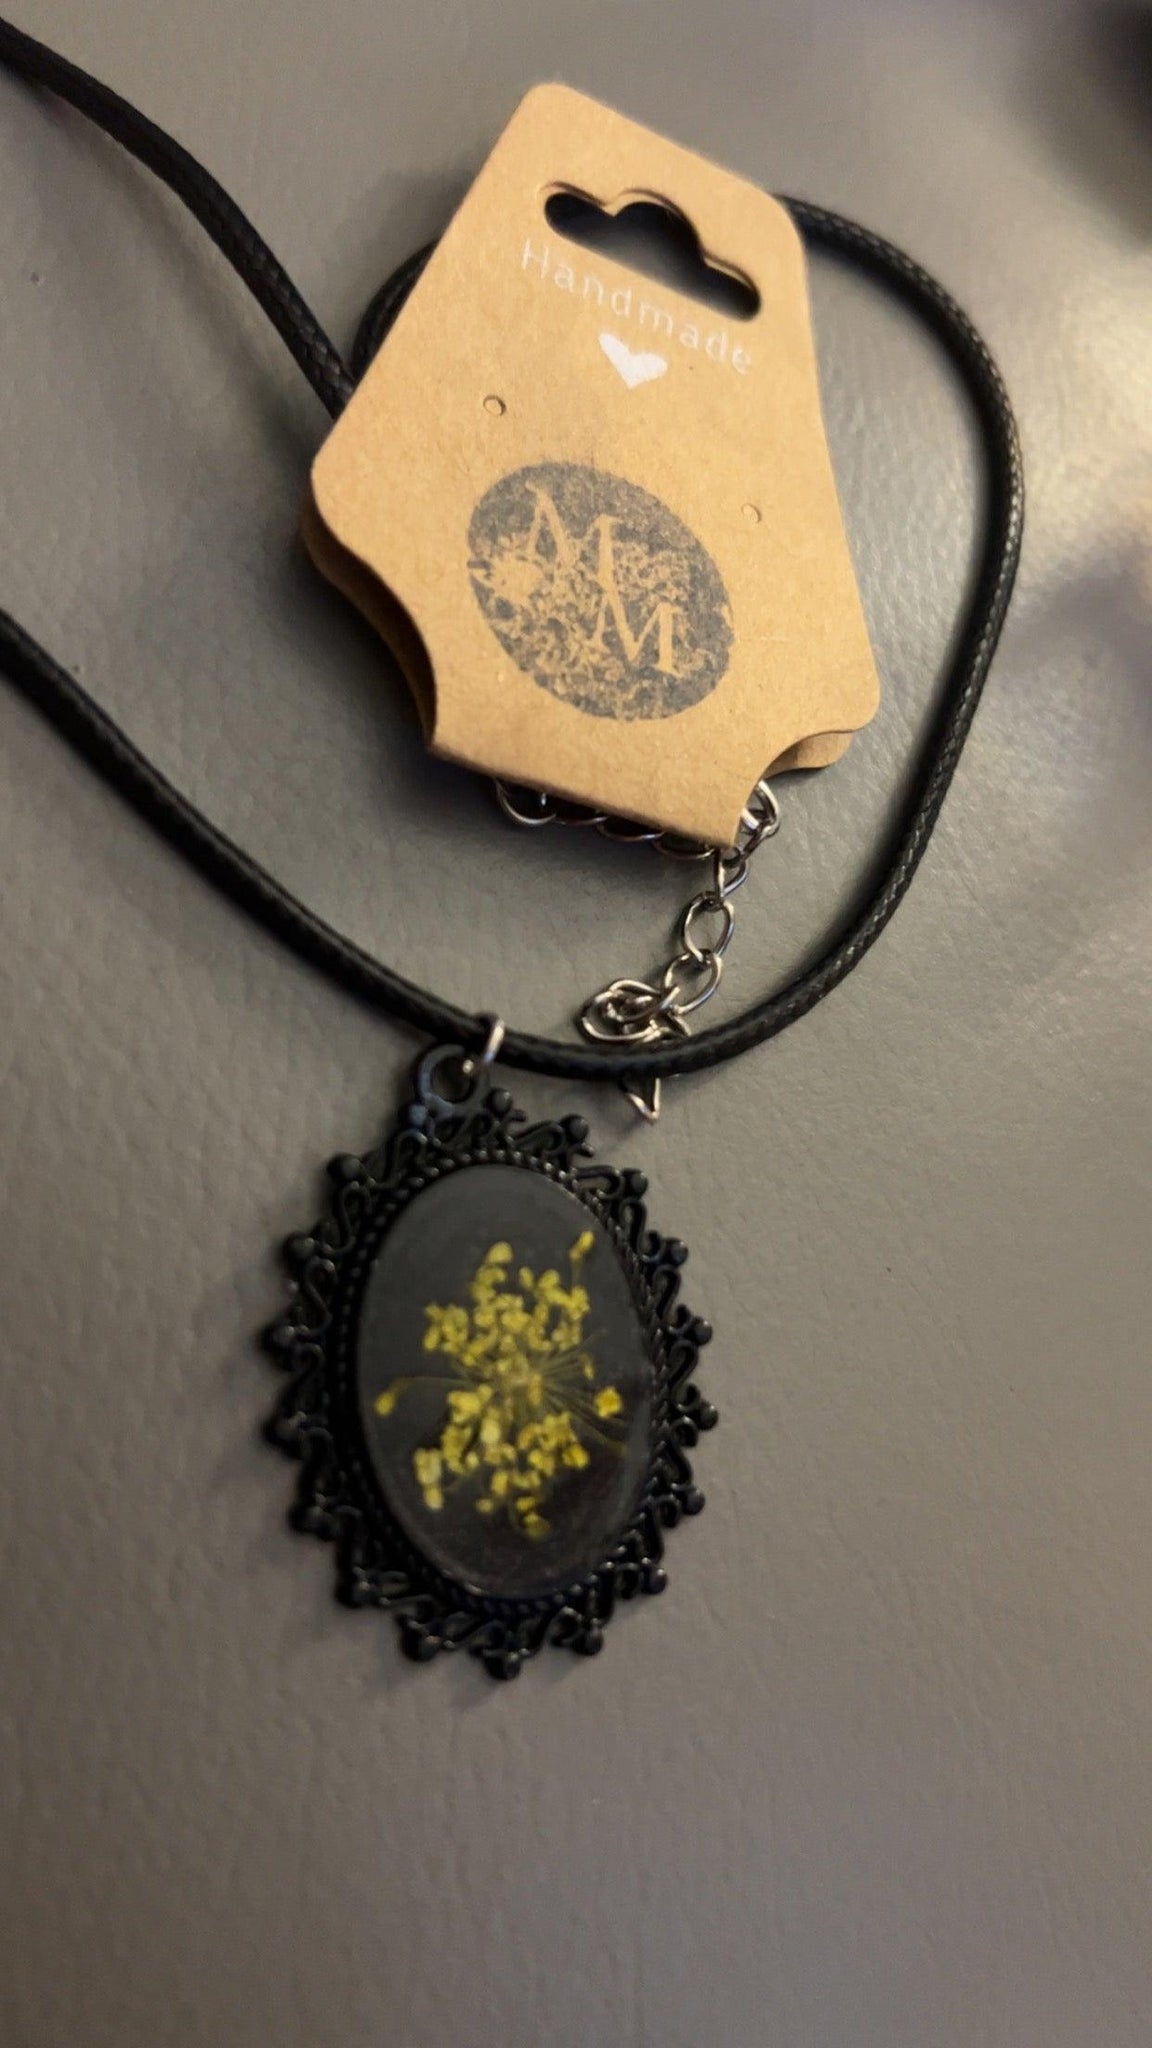 Yellow Queen Anne’s lace flower pendant